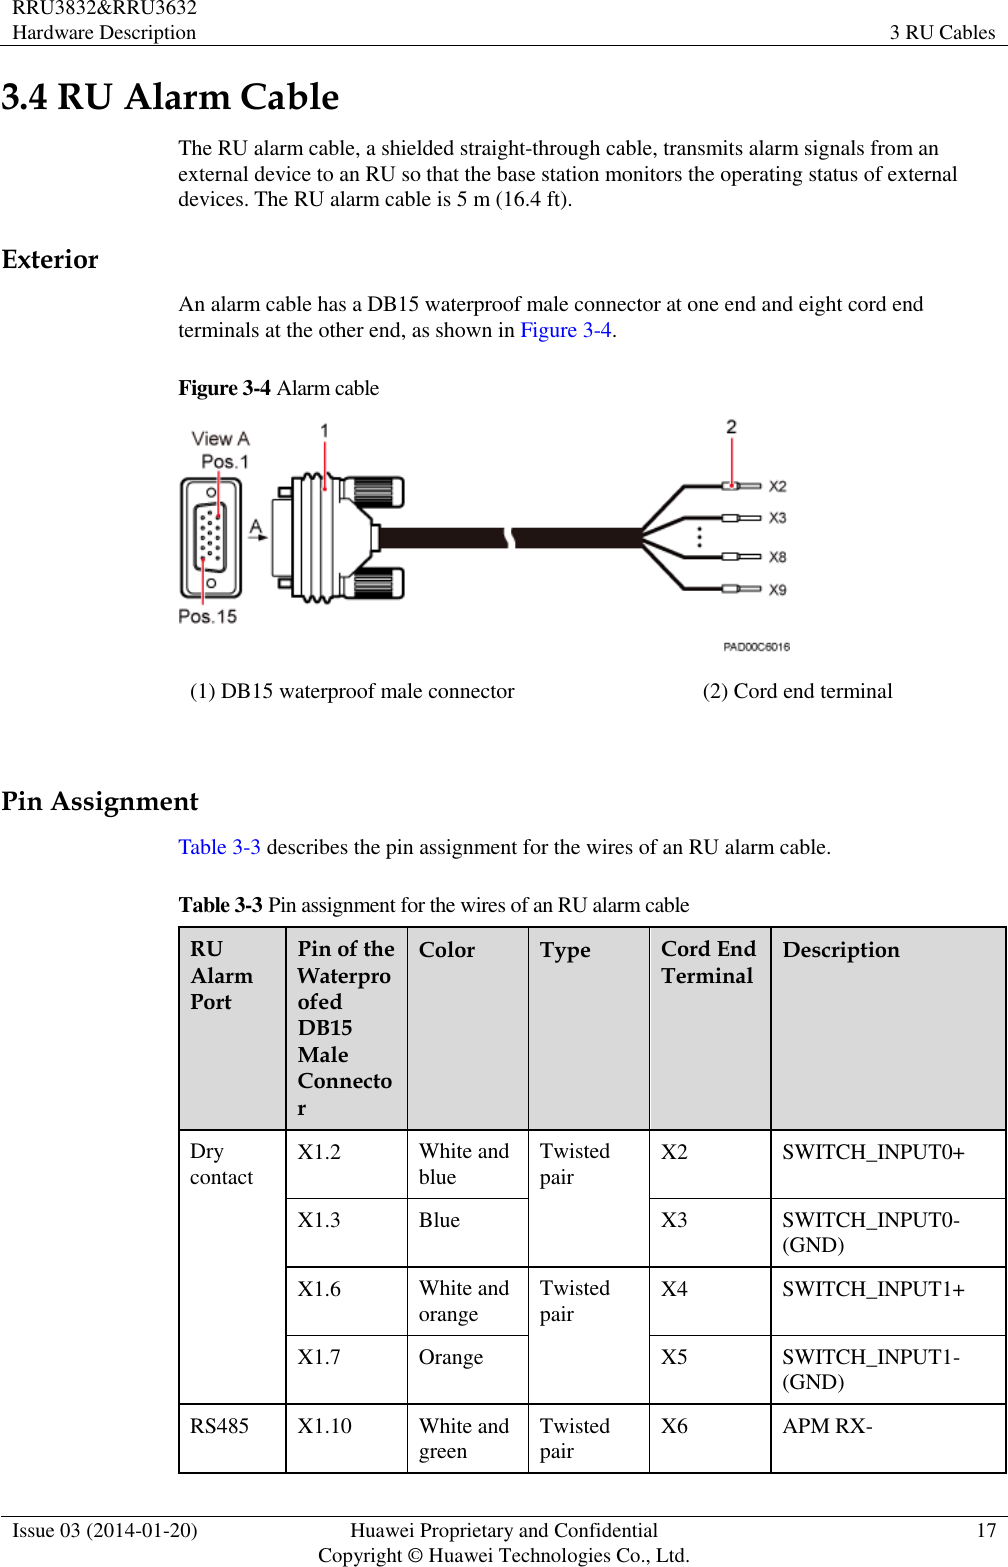 RRU3832&amp;RRU3632 Hardware Description 3 RU Cables  Issue 03 (2014-01-20) Huawei Proprietary and Confidential                                     Copyright © Huawei Technologies Co., Ltd. 17  3.4 RU Alarm Cable The RU alarm cable, a shielded straight-through cable, transmits alarm signals from an external device to an RU so that the base station monitors the operating status of external devices. The RU alarm cable is 5 m (16.4 ft). Exterior An alarm cable has a DB15 waterproof male connector at one end and eight cord end terminals at the other end, as shown in Figure 3-4. Figure 3-4 Alarm cable  (1) DB15 waterproof male connector (2) Cord end terminal  Pin Assignment Table 3-3 describes the pin assignment for the wires of an RU alarm cable. Table 3-3 Pin assignment for the wires of an RU alarm cable RU Alarm Port Pin of the Waterproofed DB15 Male Connector Color Type Cord End Terminal Description Dry contact X1.2 White and blue Twisted pair X2 SWITCH_INPUT0+ X1.3 Blue X3 SWITCH_INPUT0- (GND) X1.6 White and orange Twisted pair X4 SWITCH_INPUT1+ X1.7 Orange X5 SWITCH_INPUT1- (GND) RS485 X1.10 White and green Twisted pair X6 APM RX- 